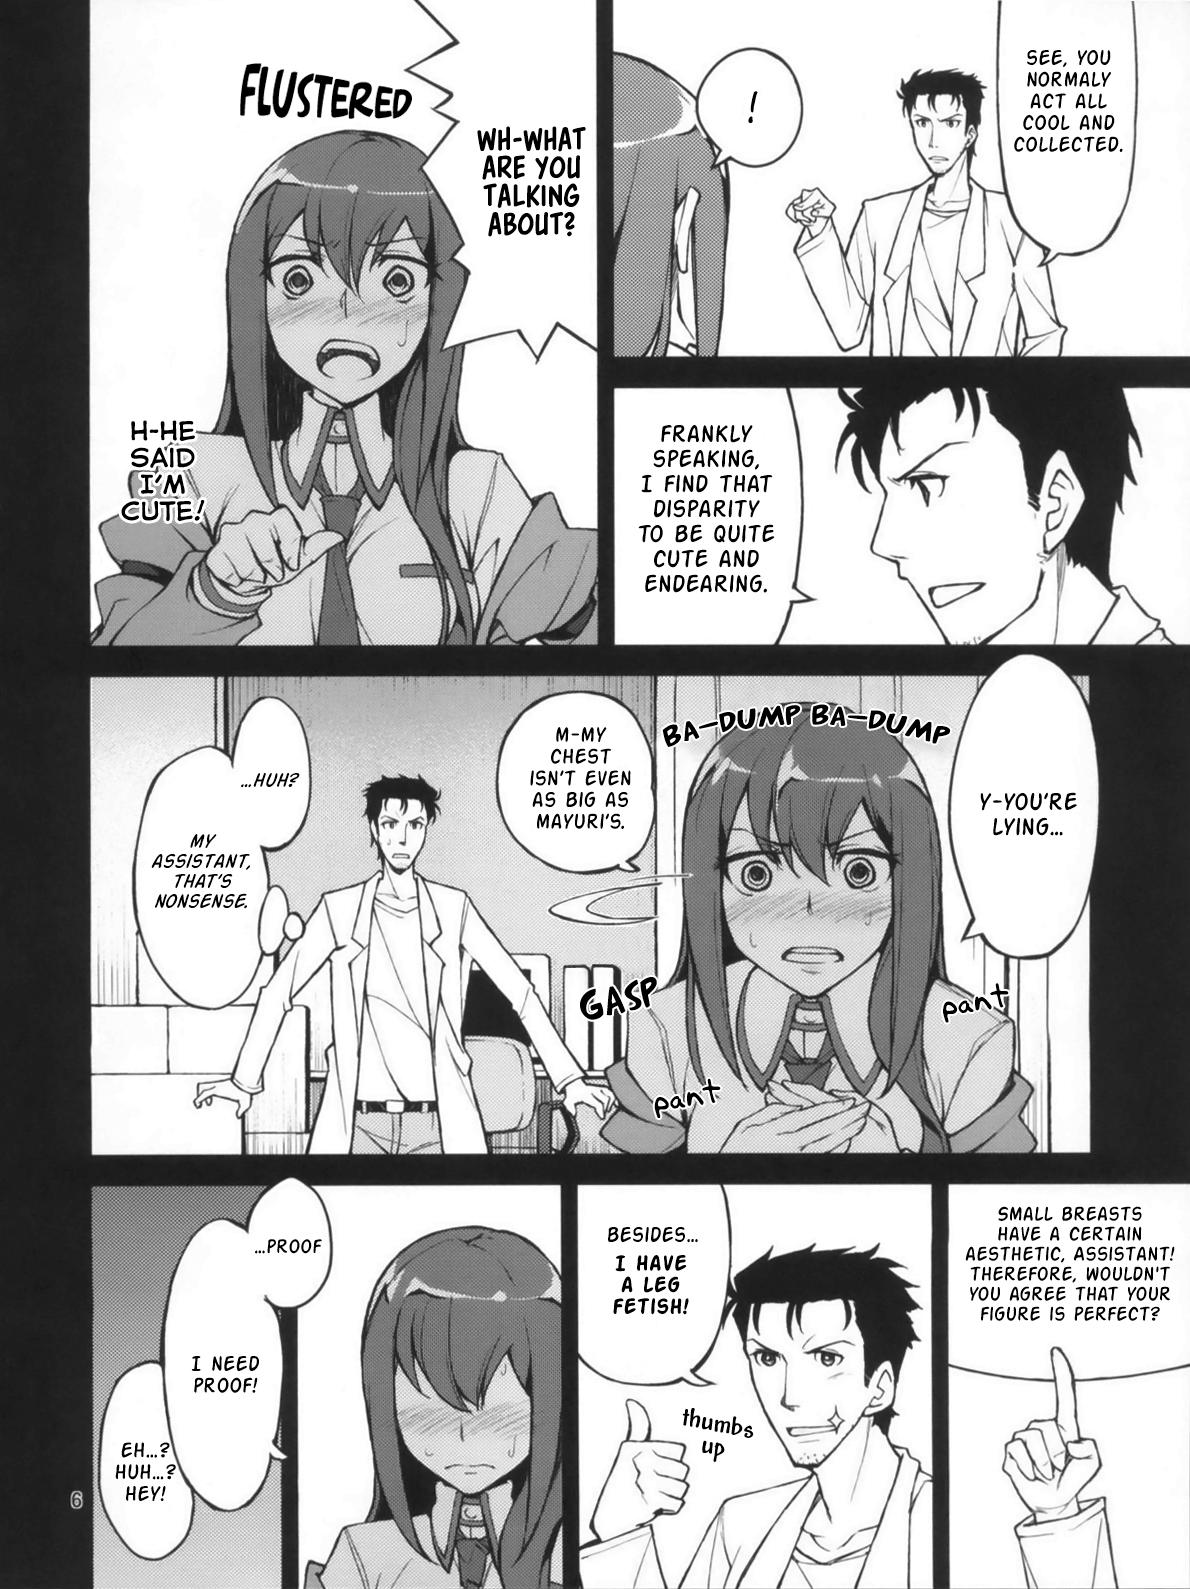 Blowjob Christina! - Steinsgate Point Of View - Page 6